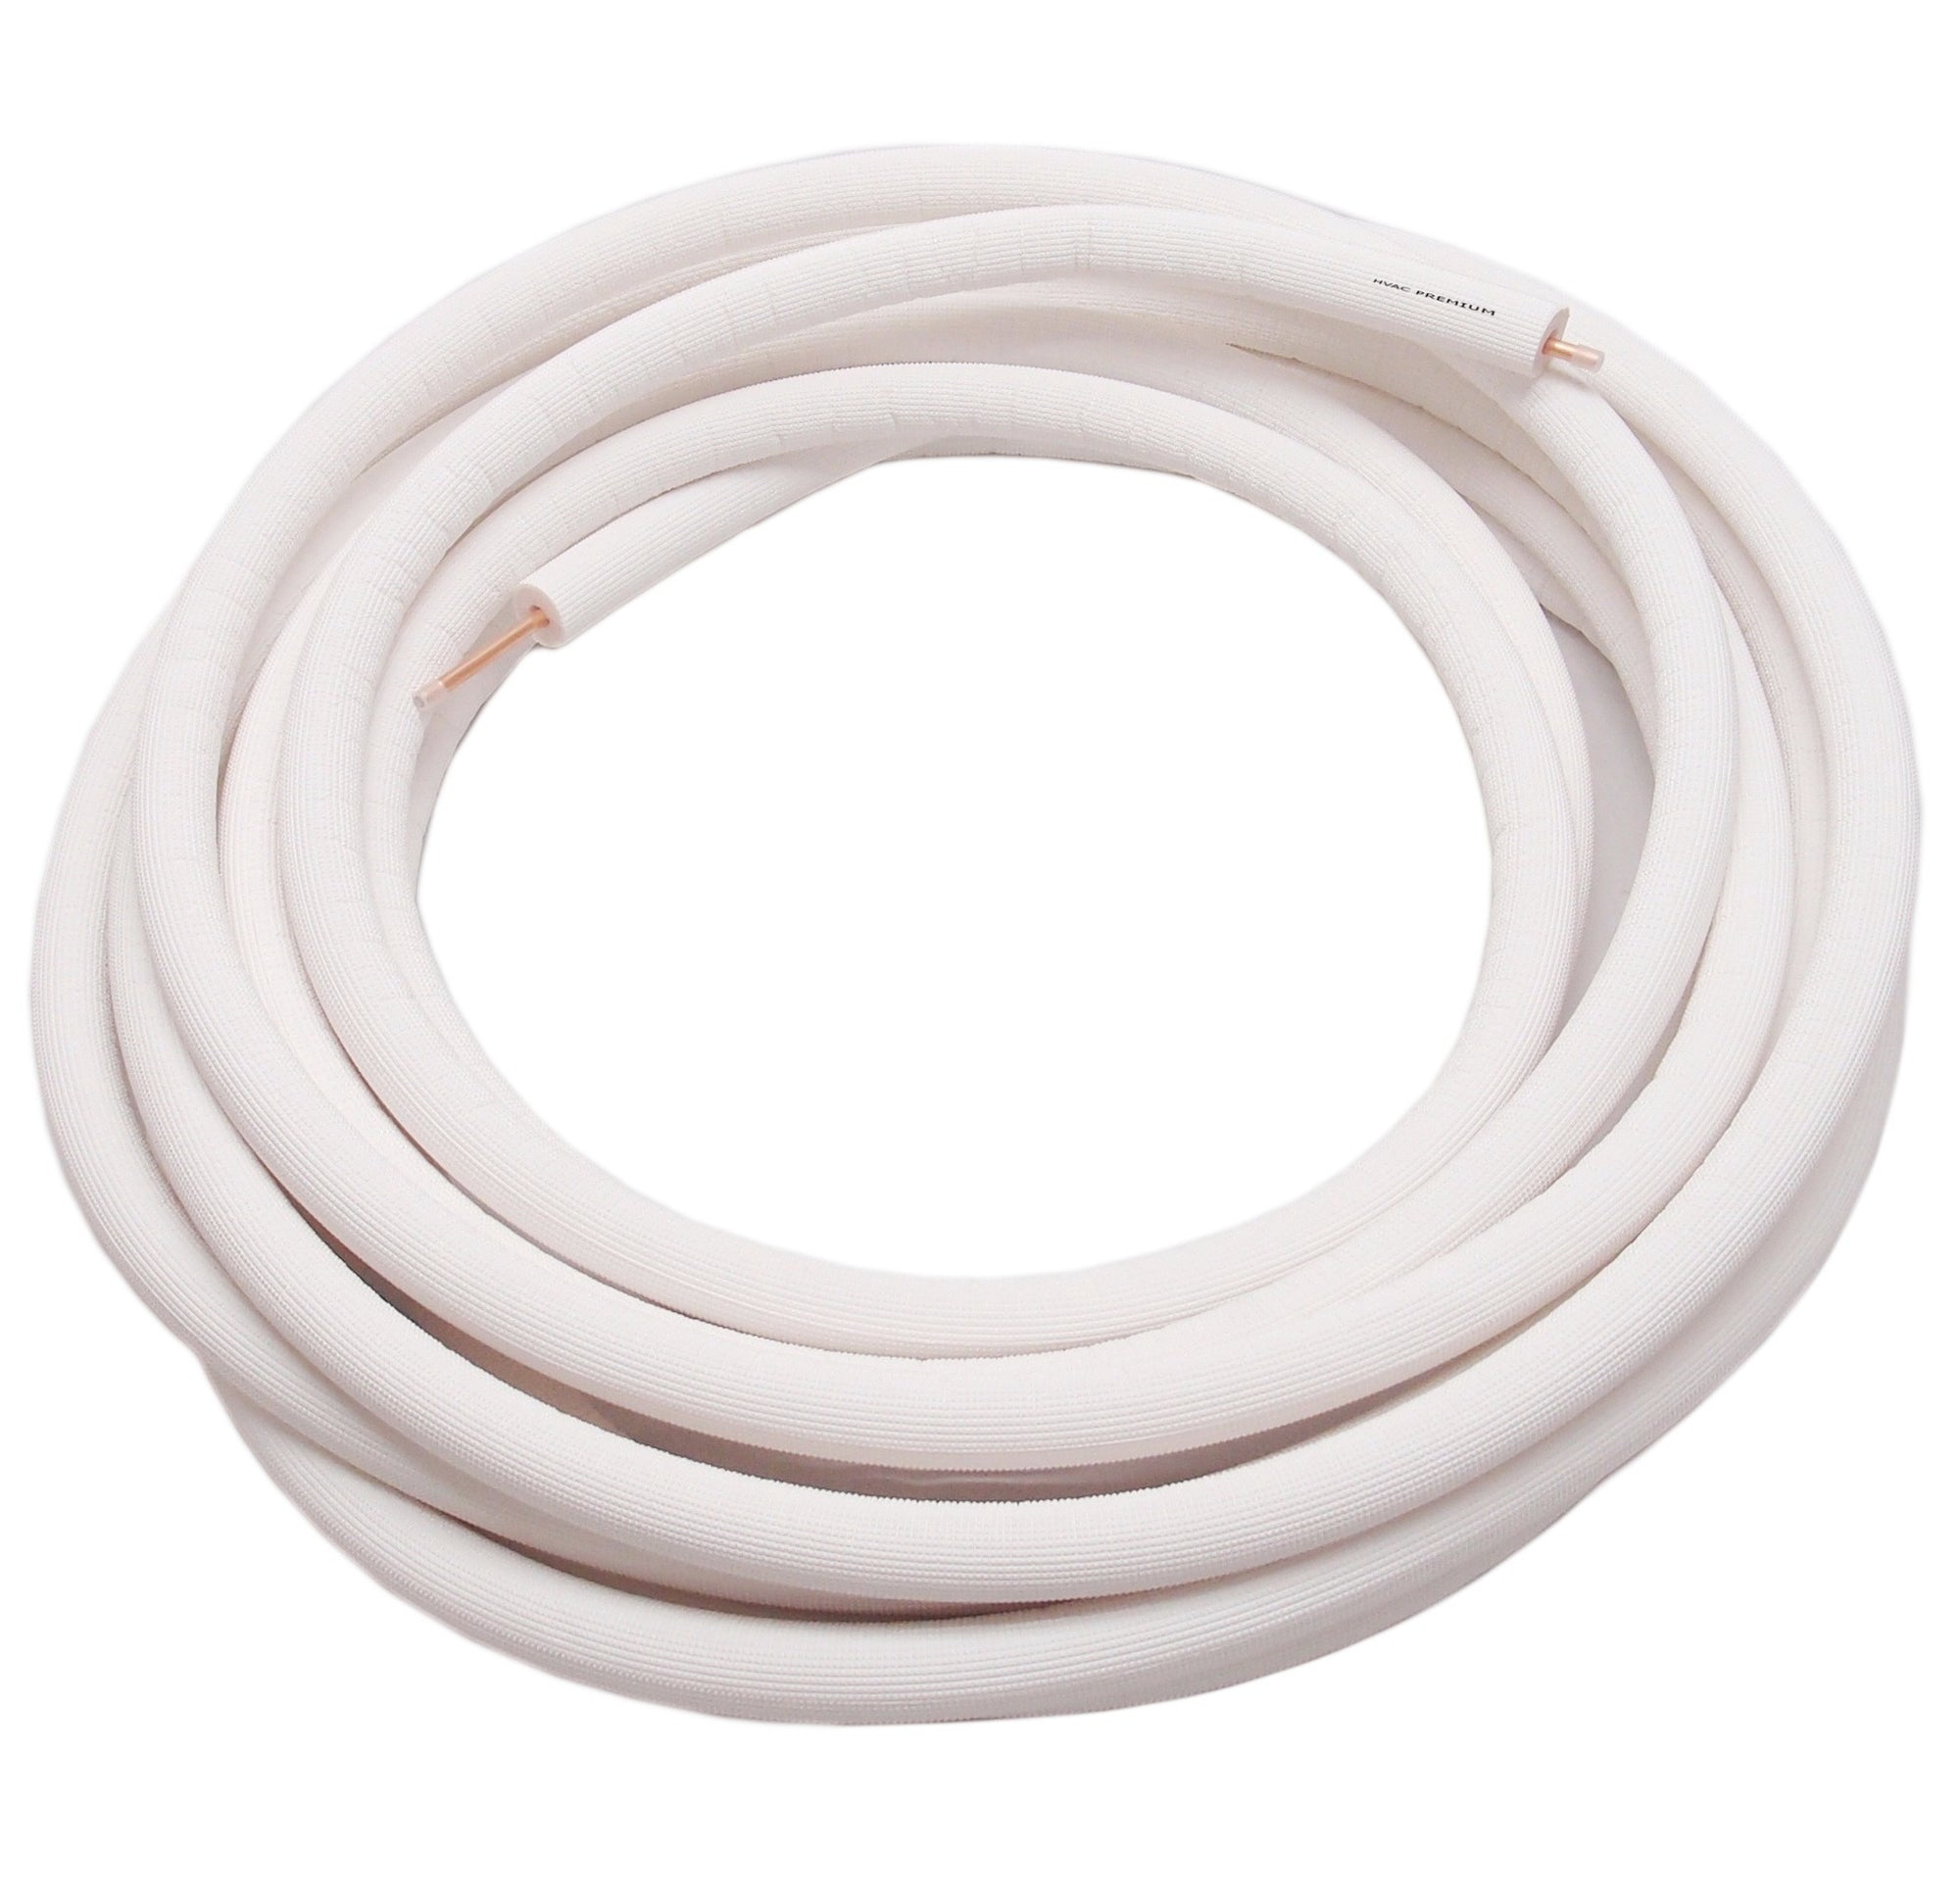 1/4" Insulated Copper Coil Line - Seamless Pipe Tube for HVAC, Refrigerant - 1/2" White Insulation - 15' Long